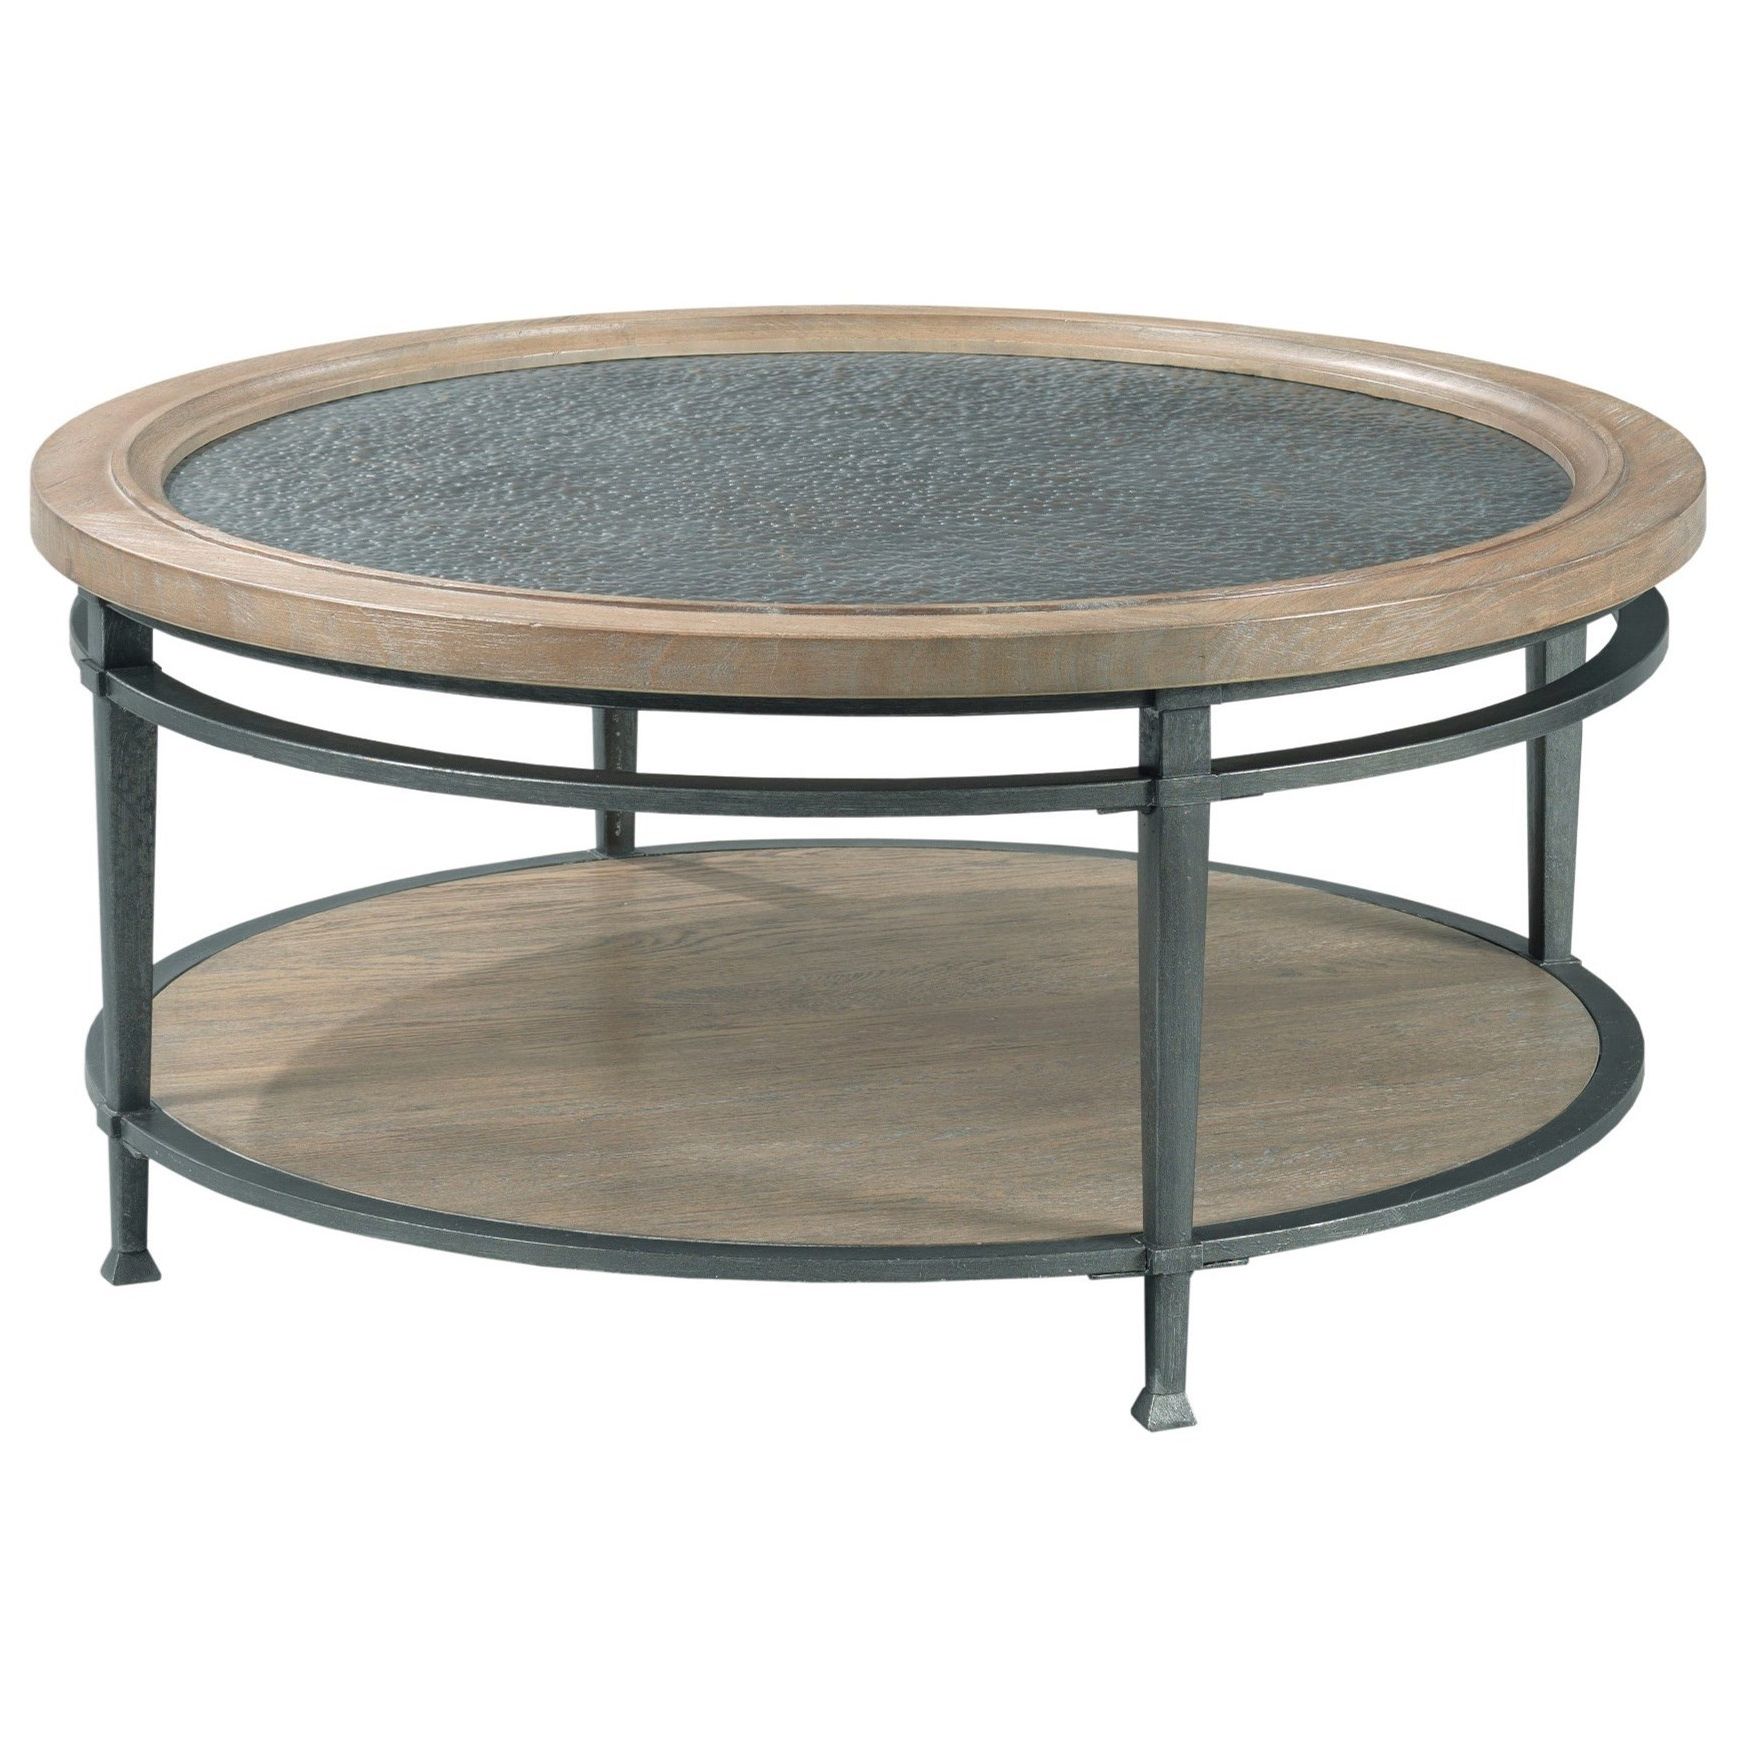 Hammary Austin Transitional Round Coffee Table (View 14 of 15)